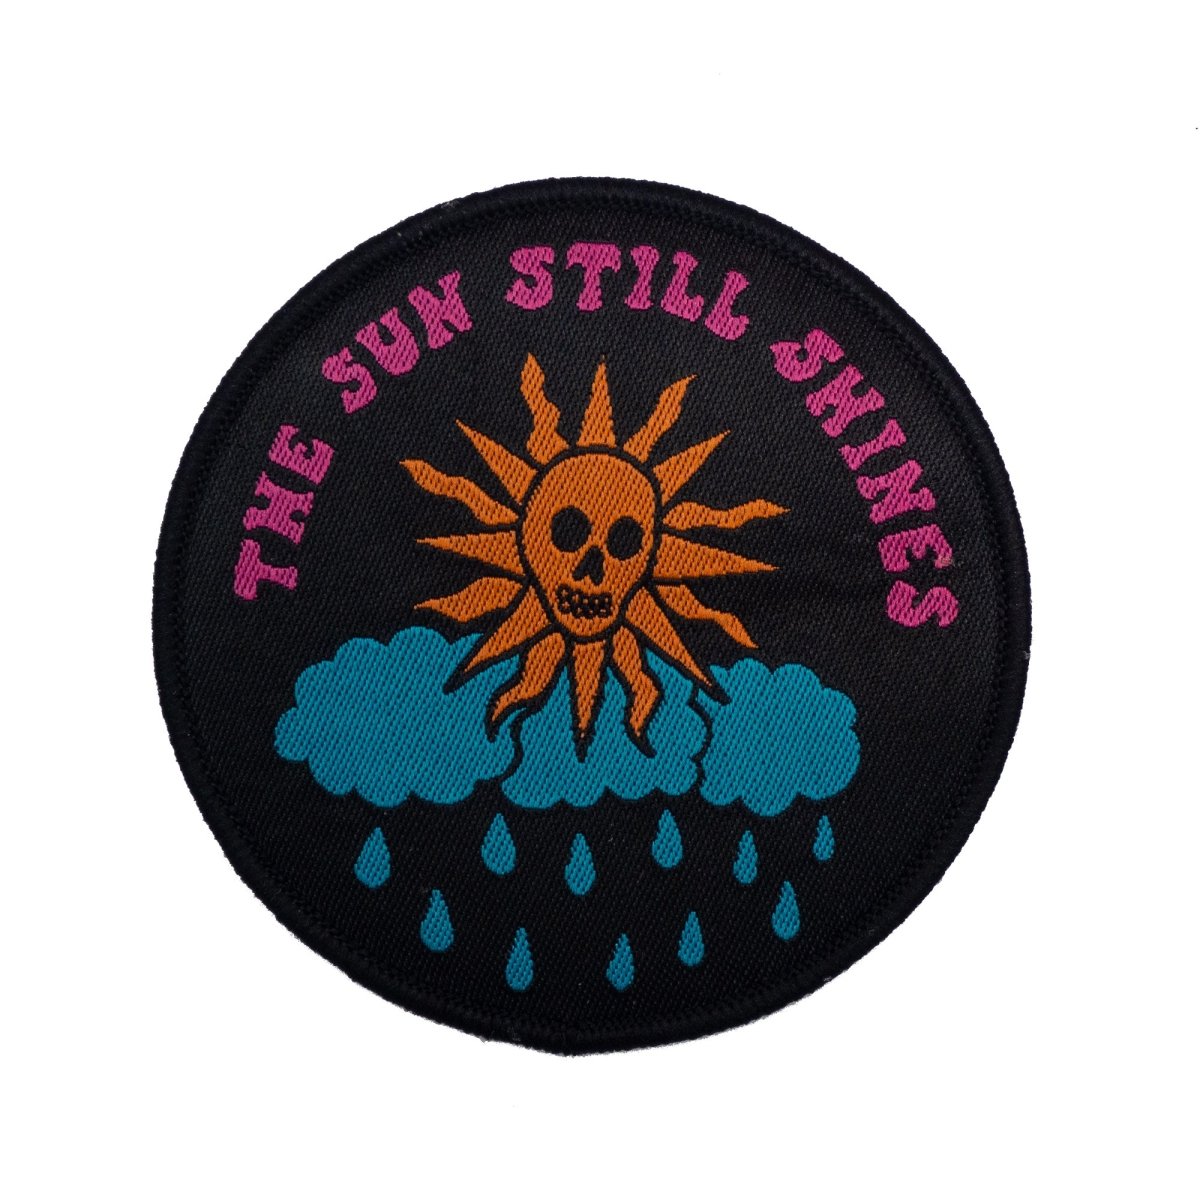 The Sun Still Shines Patch - Patch - Pretty Bad Co.